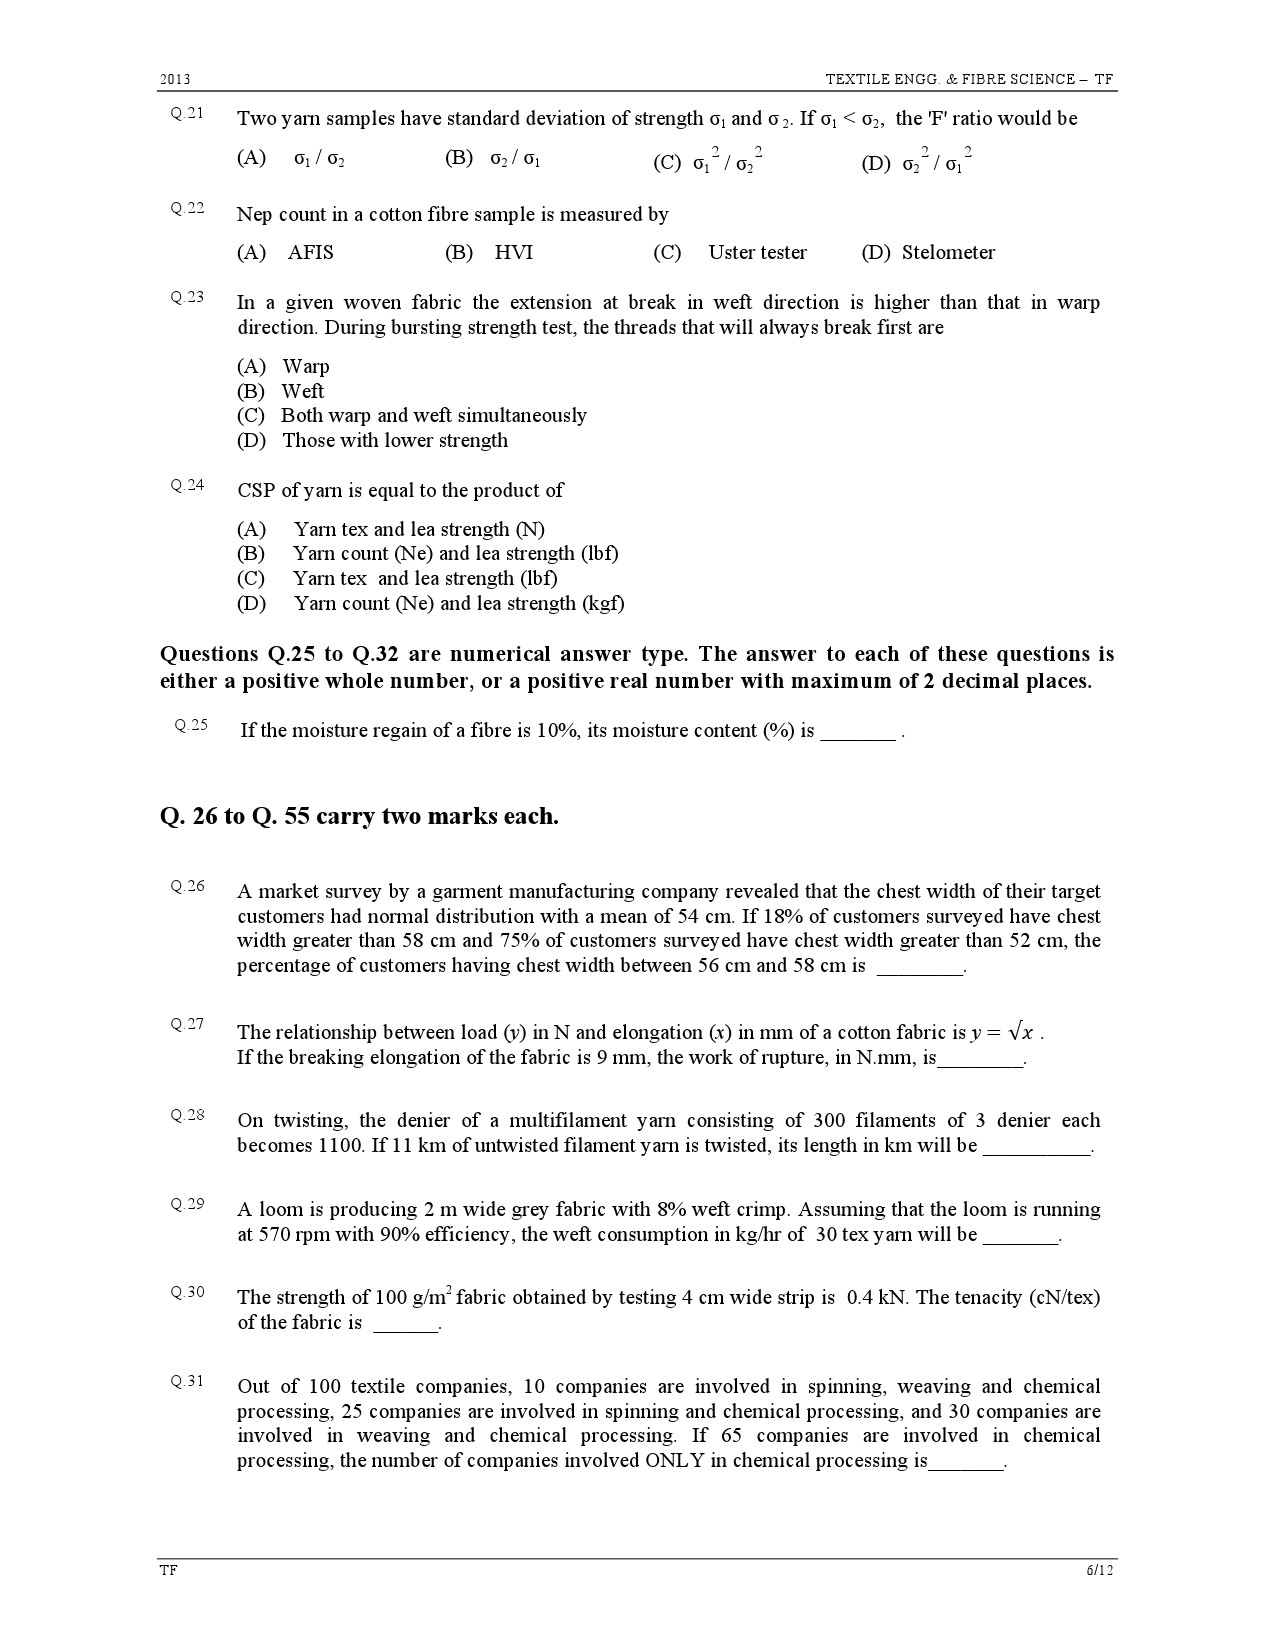 GATE Exam Question Paper 2013 Textile Engineering and Fibre Science 6